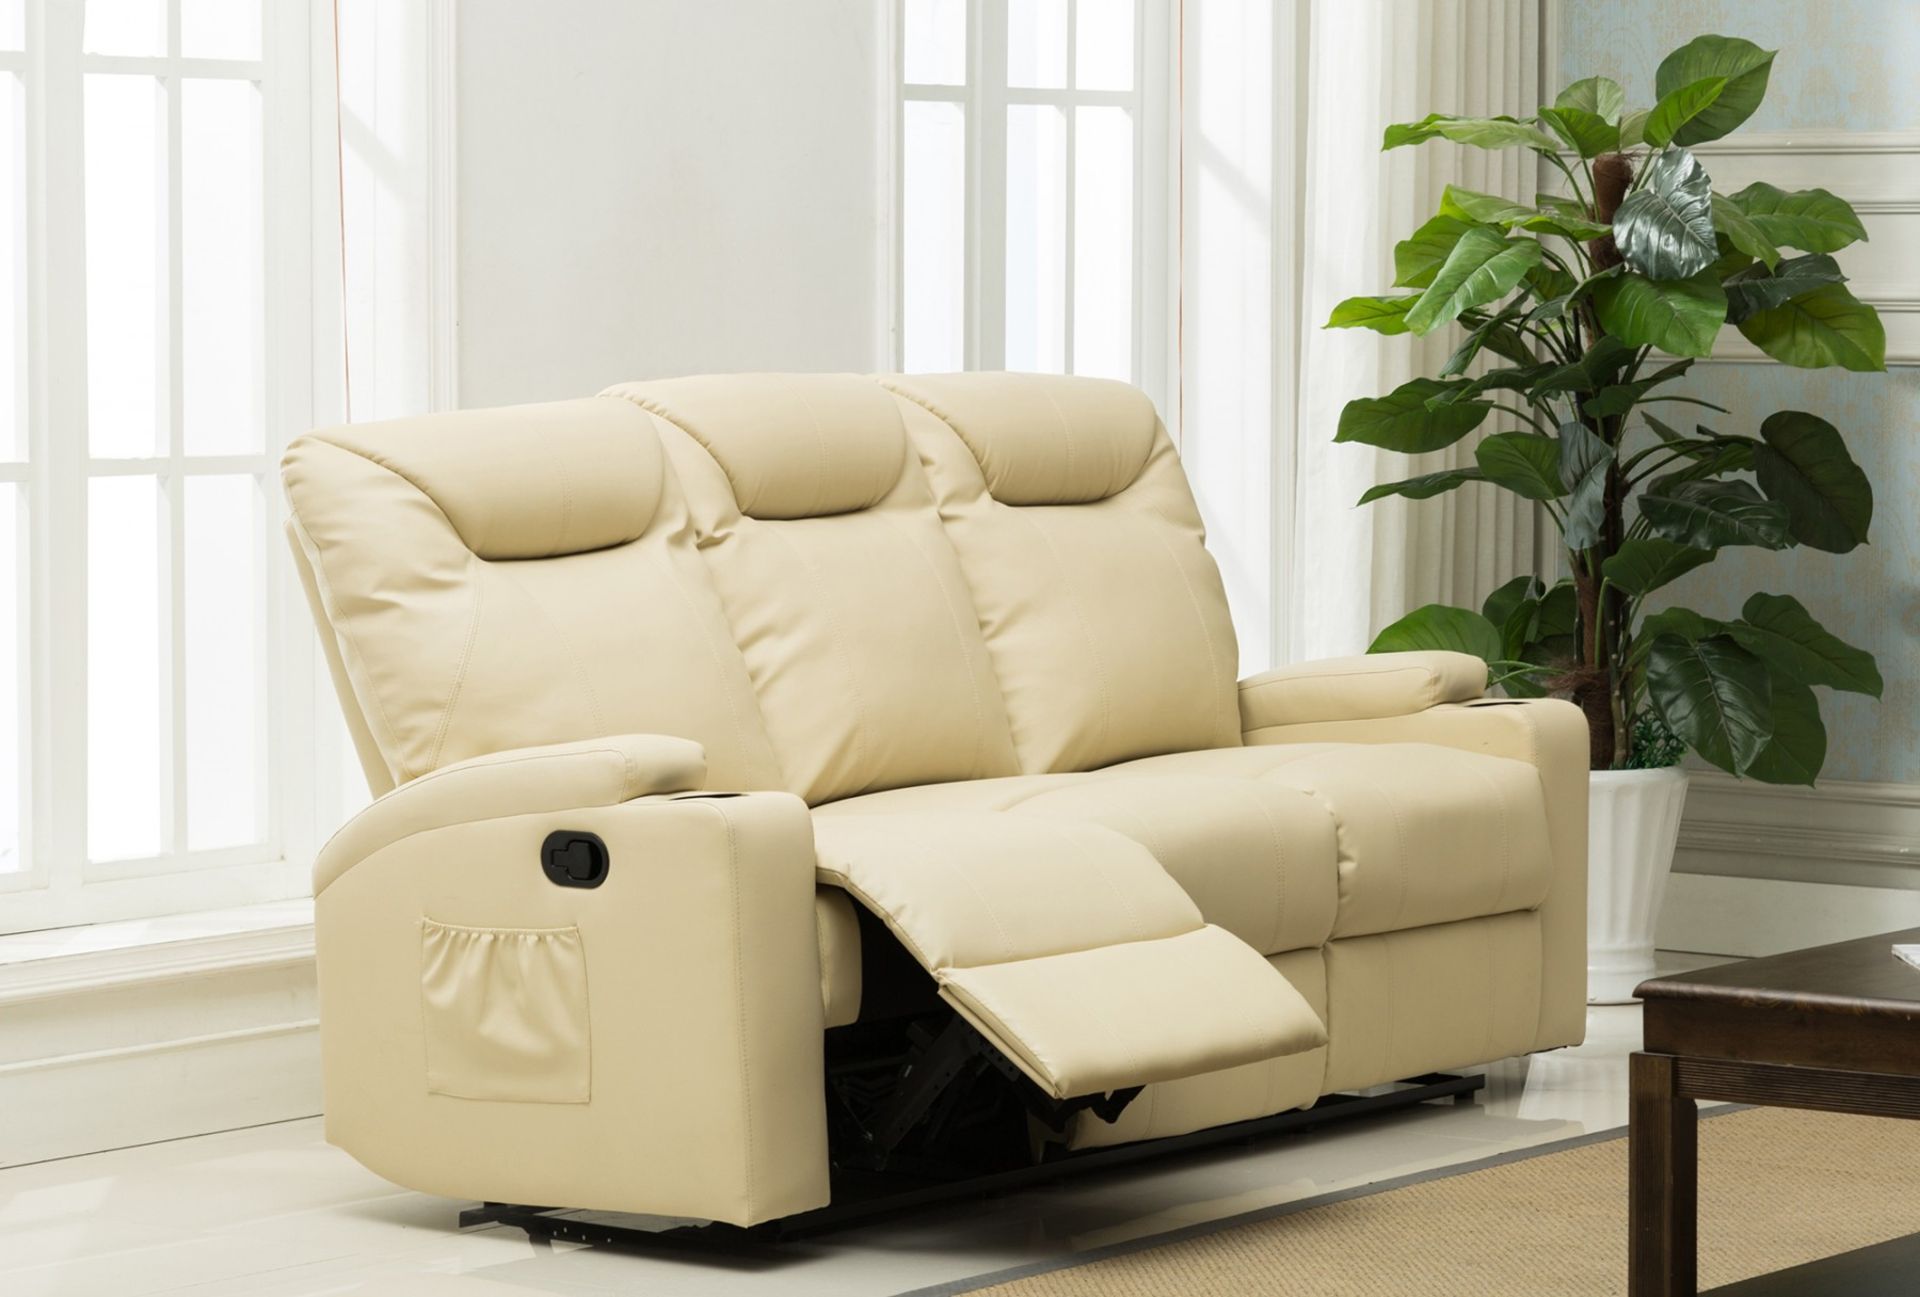 Brand New Boxed 3 Seater Plus 2 Seater Lazyboy Cream Leather Manual Reclining Sofas - Image 2 of 3